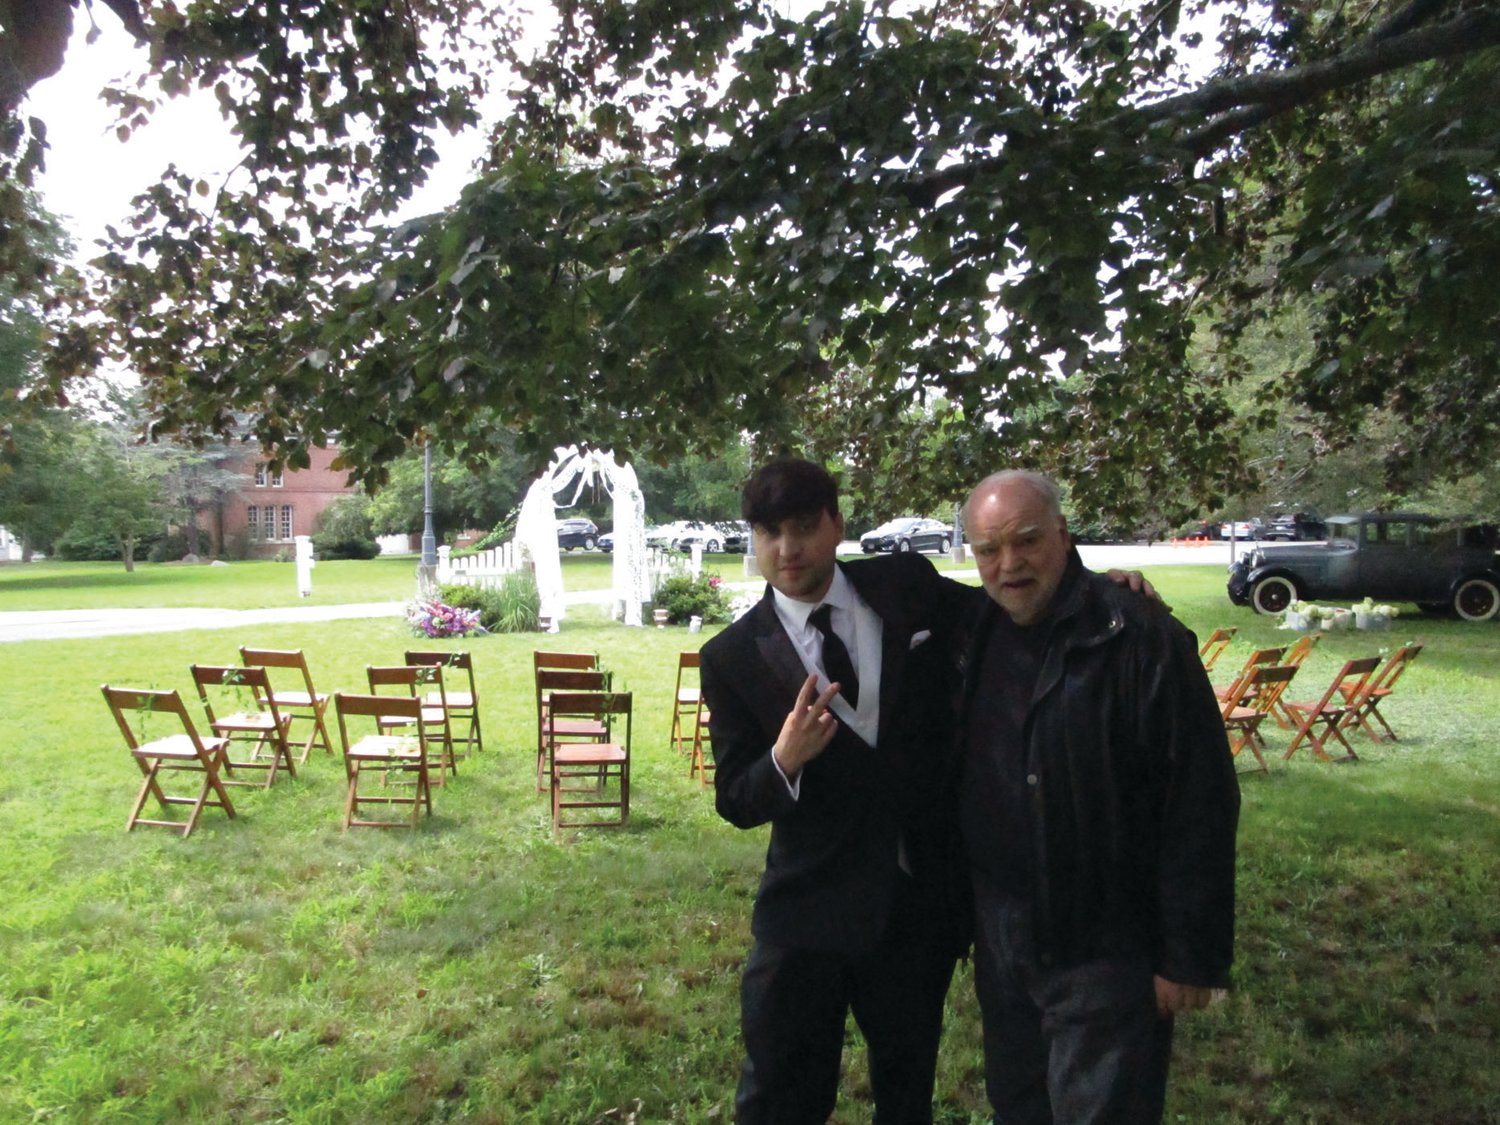 PAUL AND PAUL: Adam Carbone, who plays the title character in “Poor Paul,” shares a moment with veteran actor Richard Riehle, who plays Grandpa Paul, ahead of the wedding scene shoot outside the Sprague Mansion on Saturday.